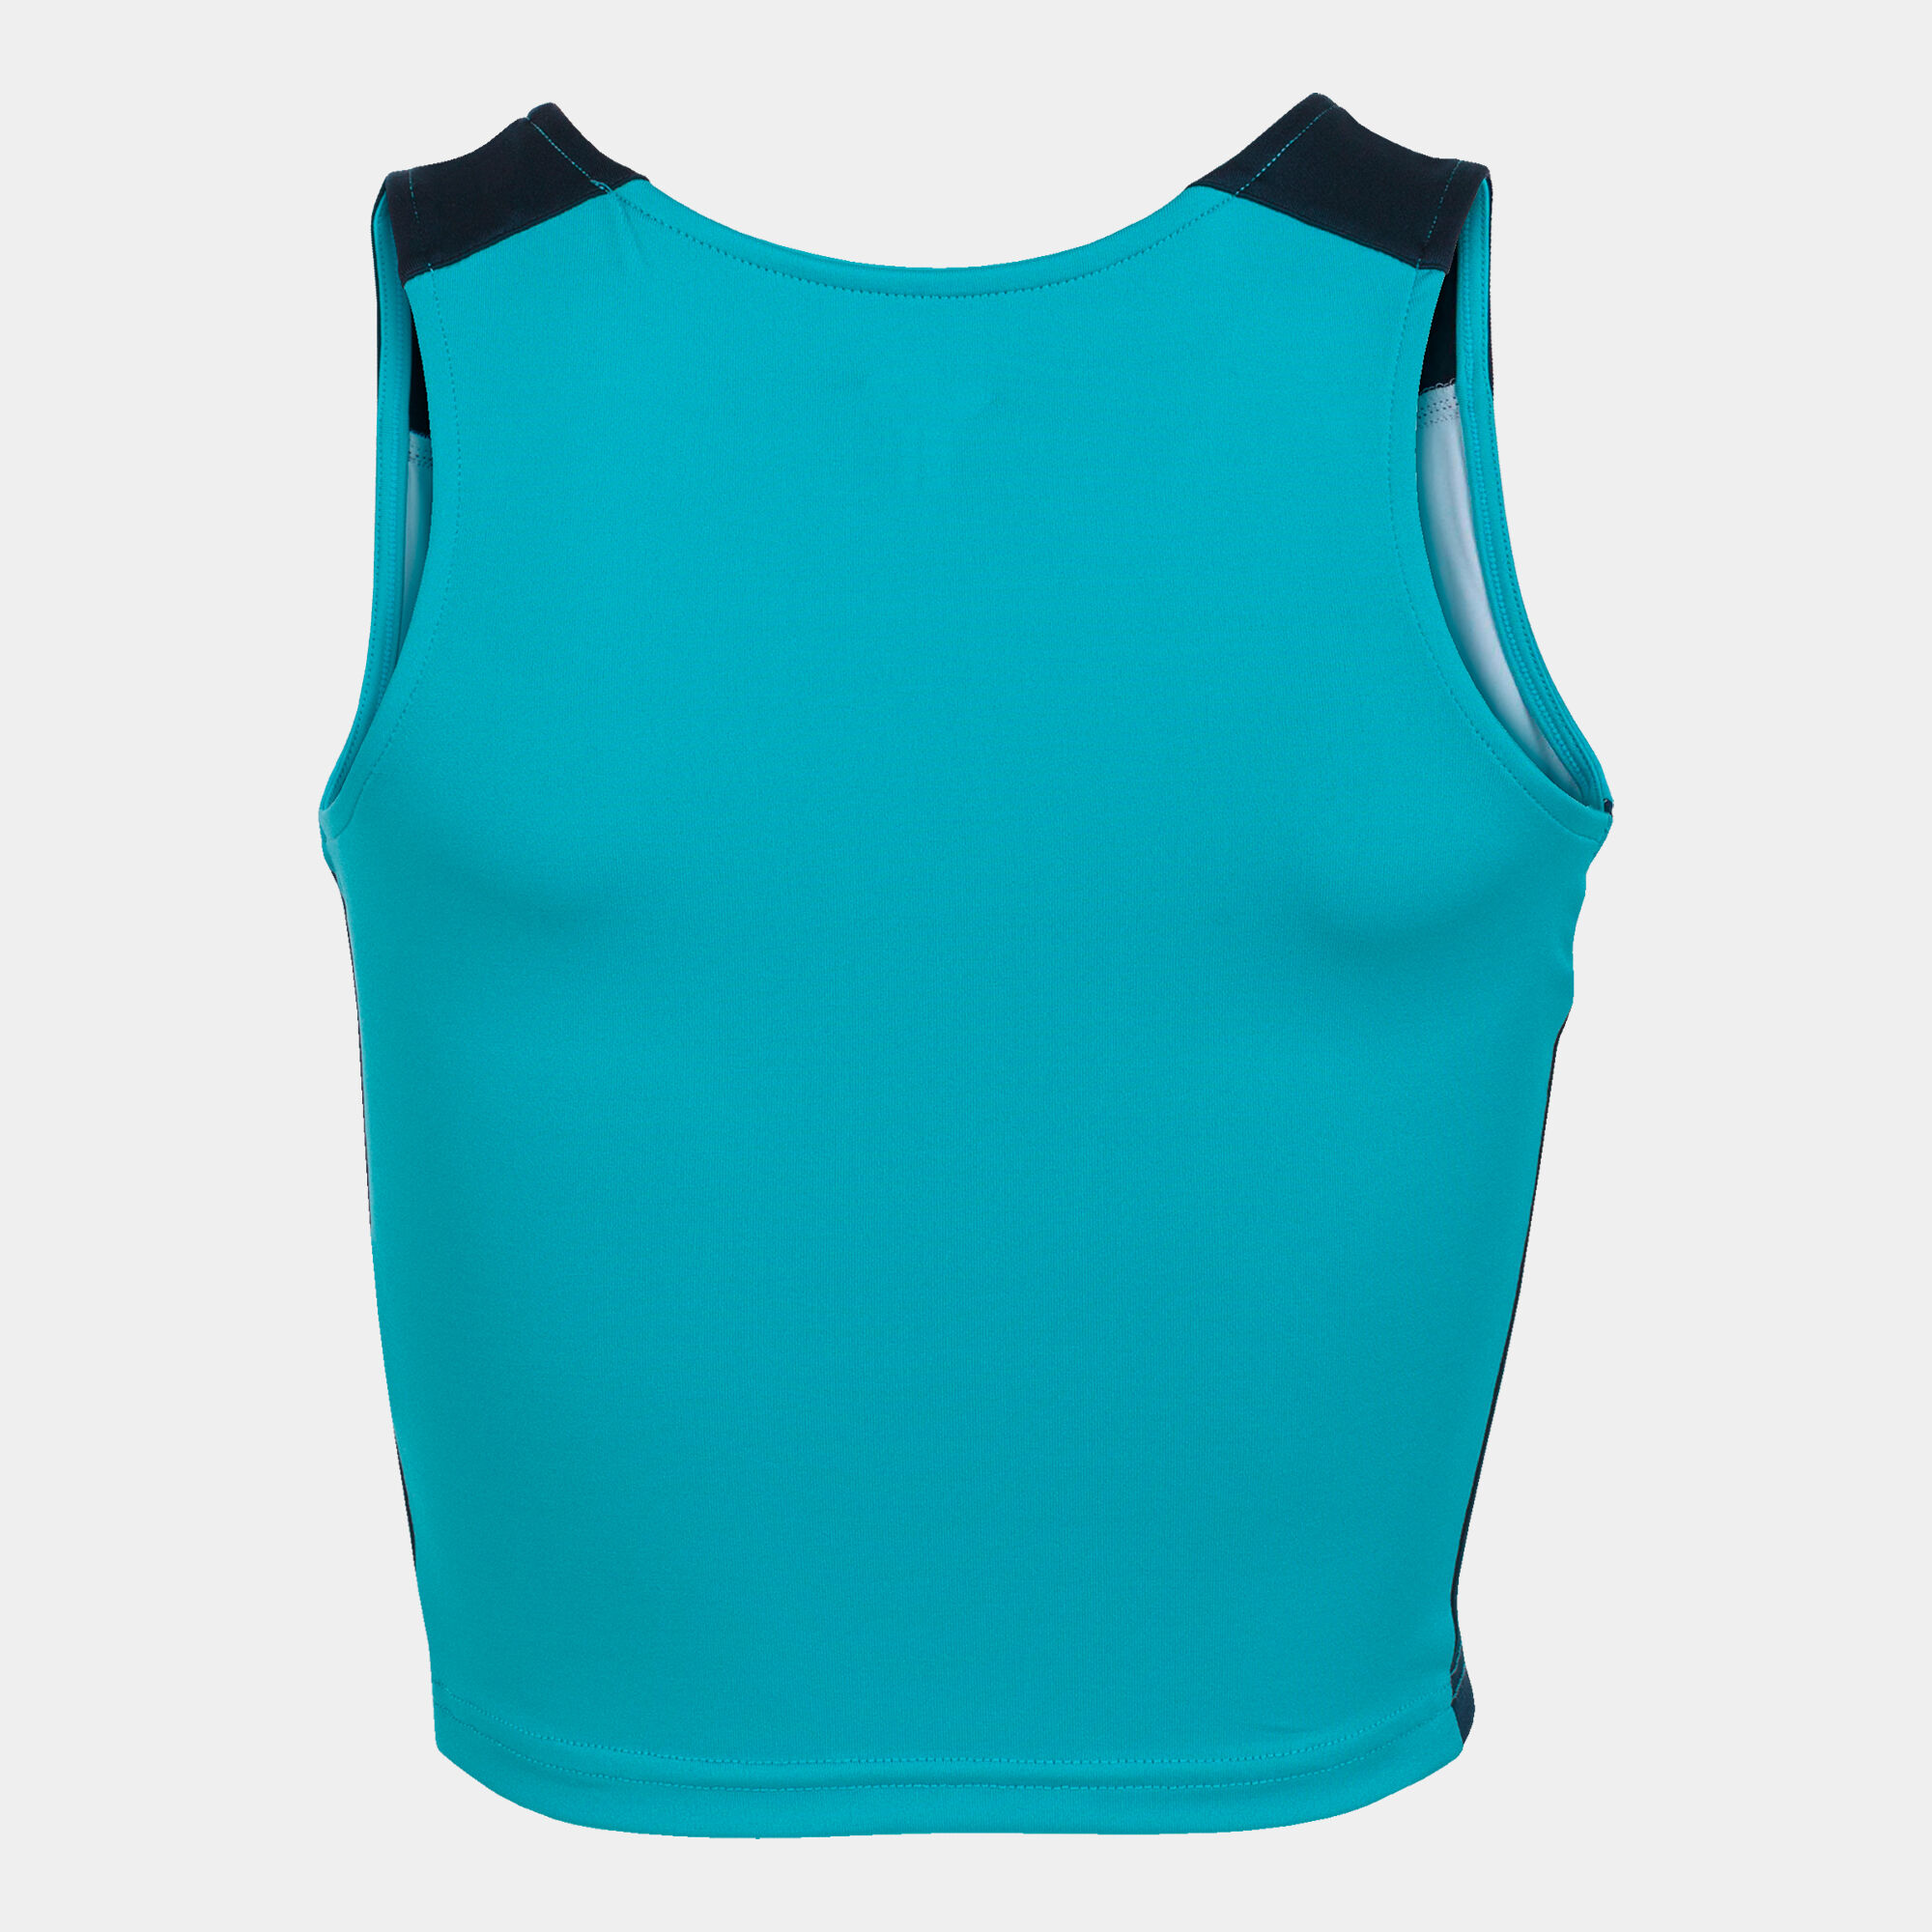 Tank-top woman Record II fluorescent turquoise navy blue